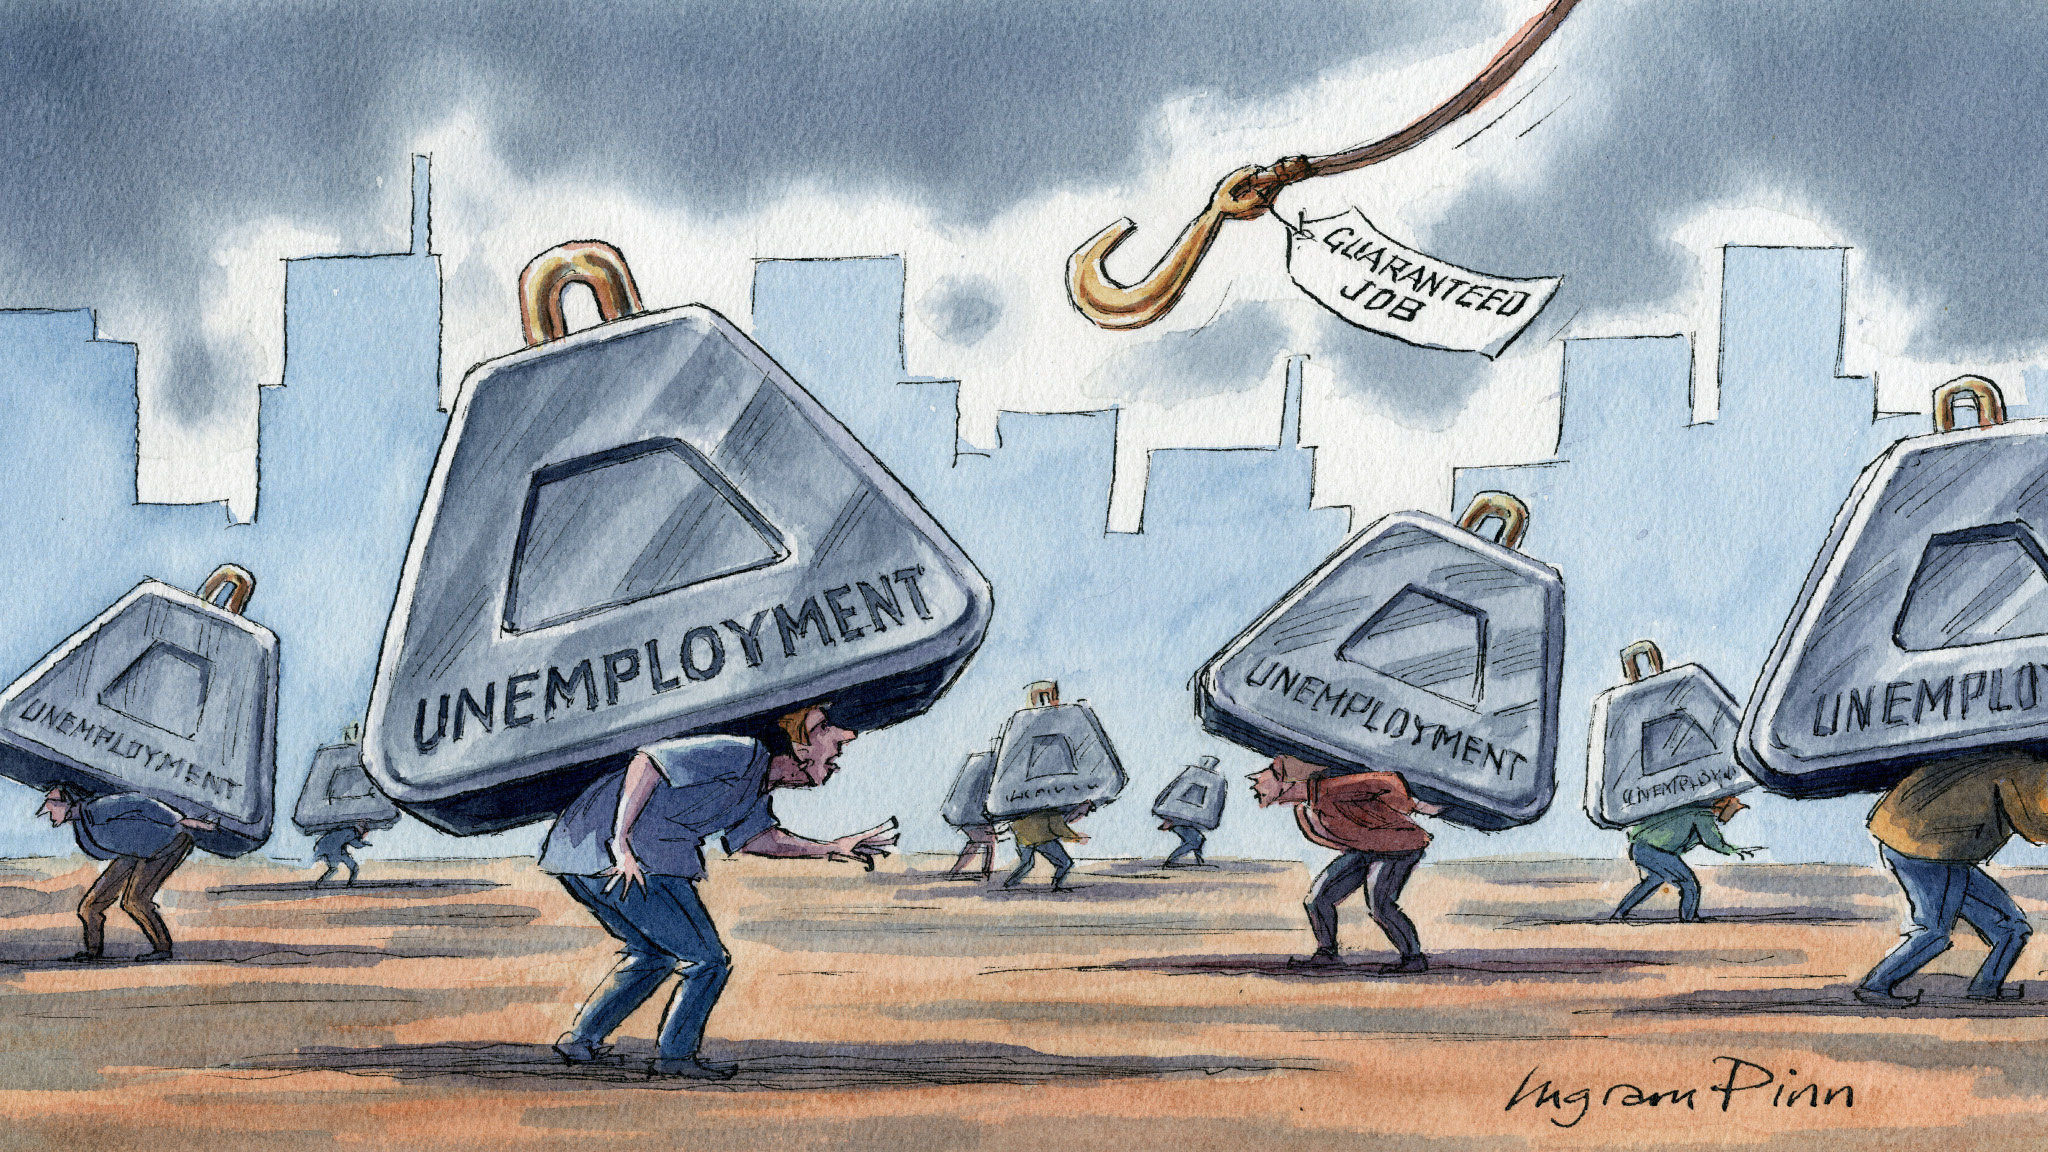 Nigeria’s unemployment rate estimated at 40.6% – KPMG report